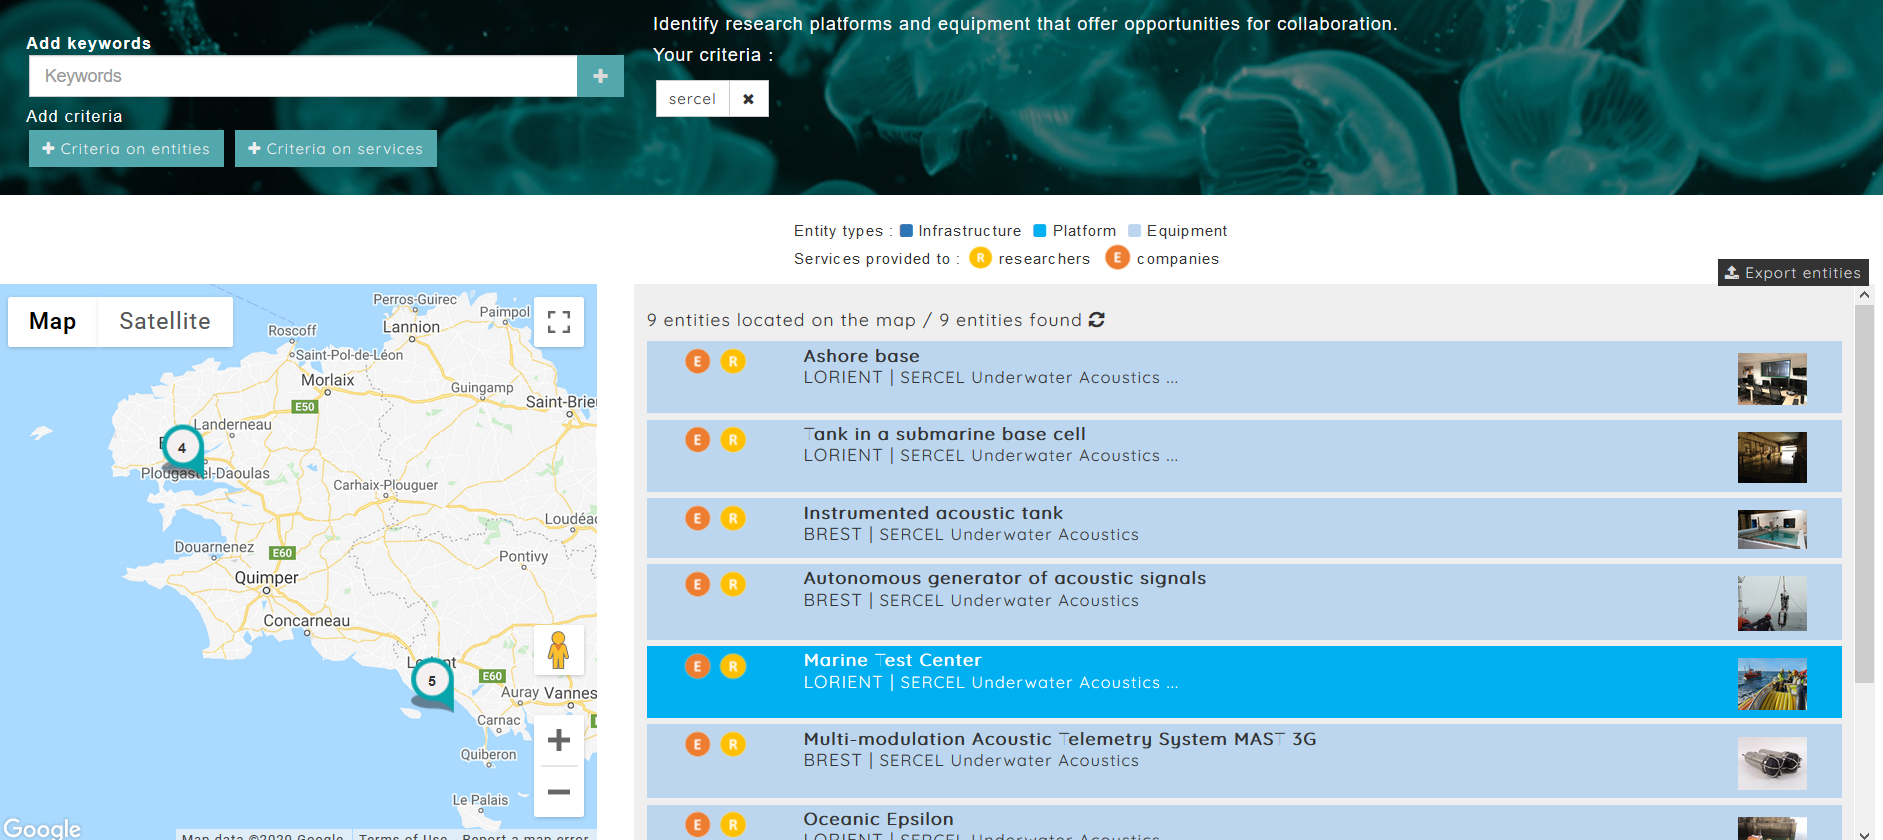 Marine research infrastructures and facilities portal